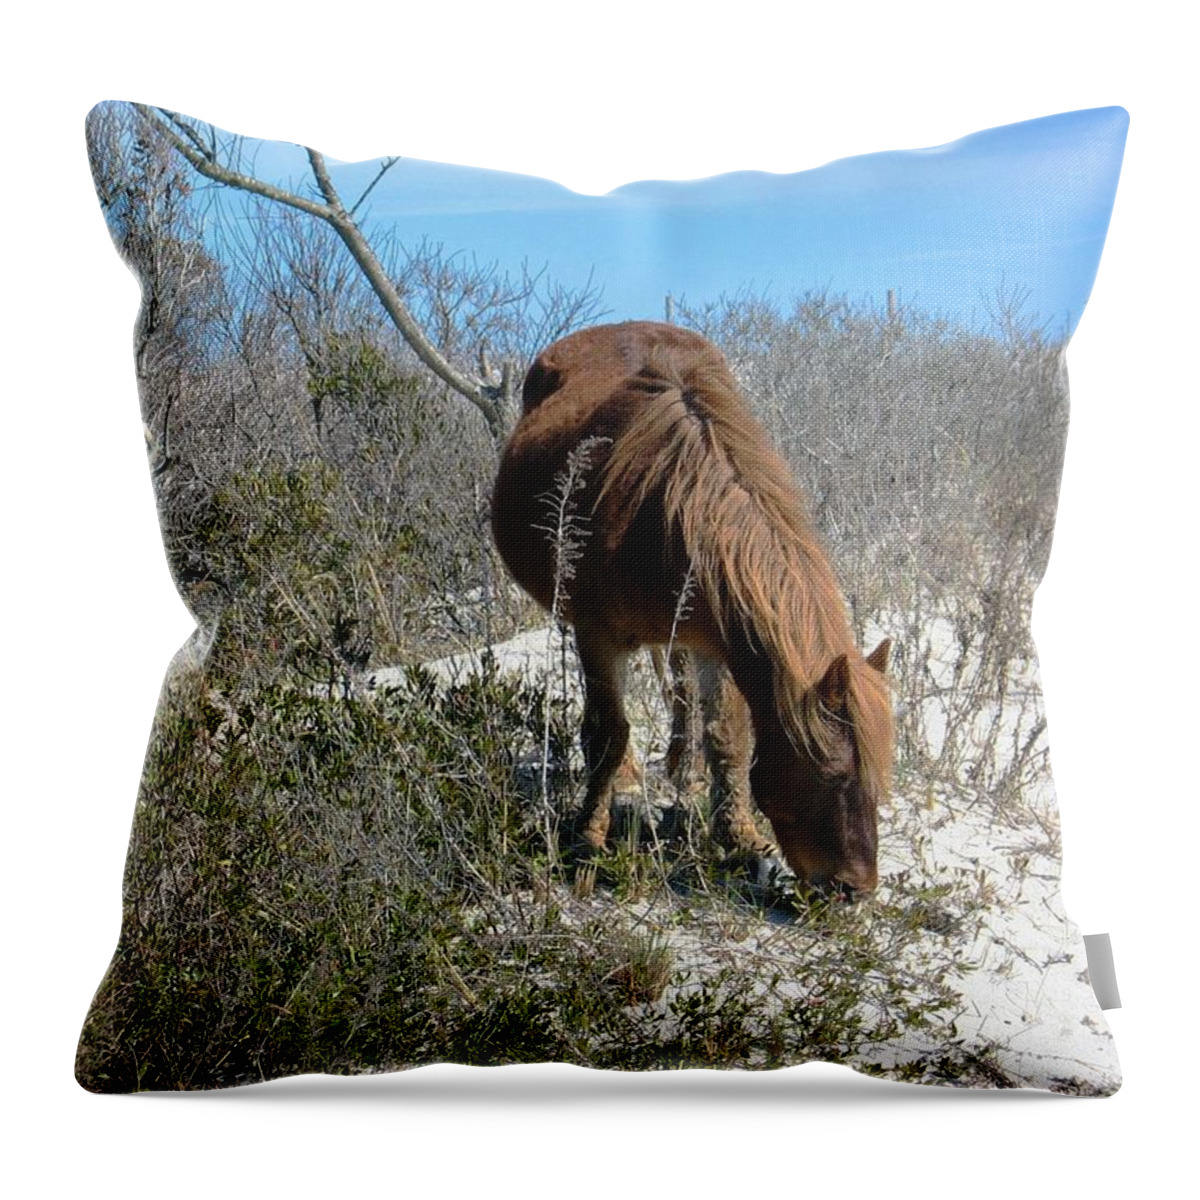 Horse Throw Pillow featuring the photograph What do I see here? by Photographic Arts And Design Studio